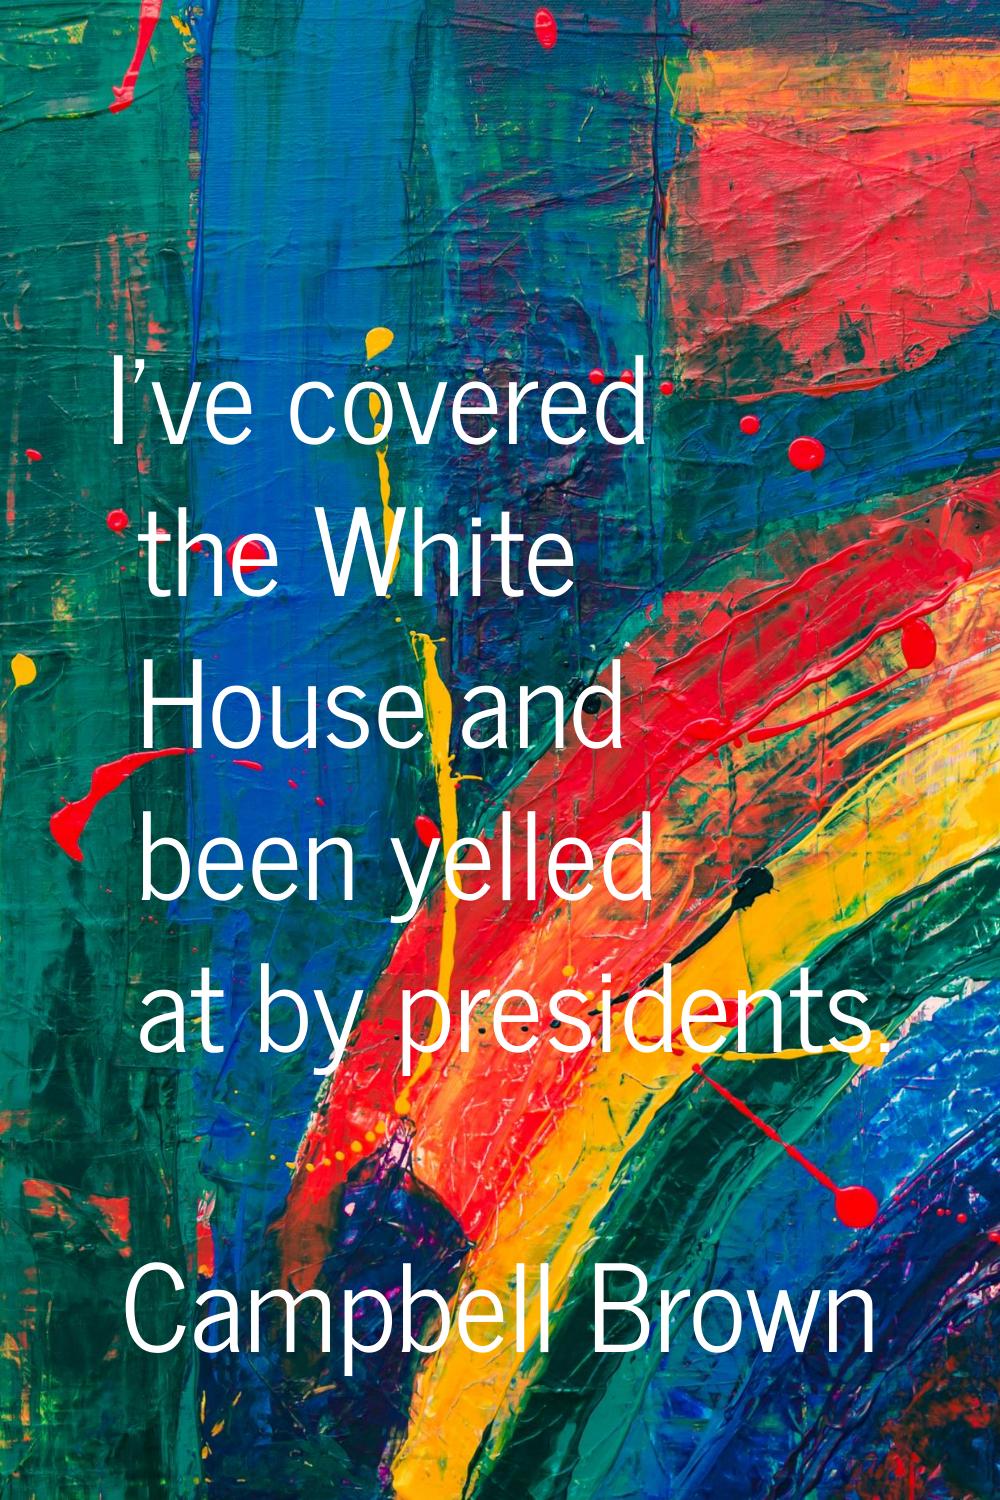 I've covered the White House and been yelled at by presidents.